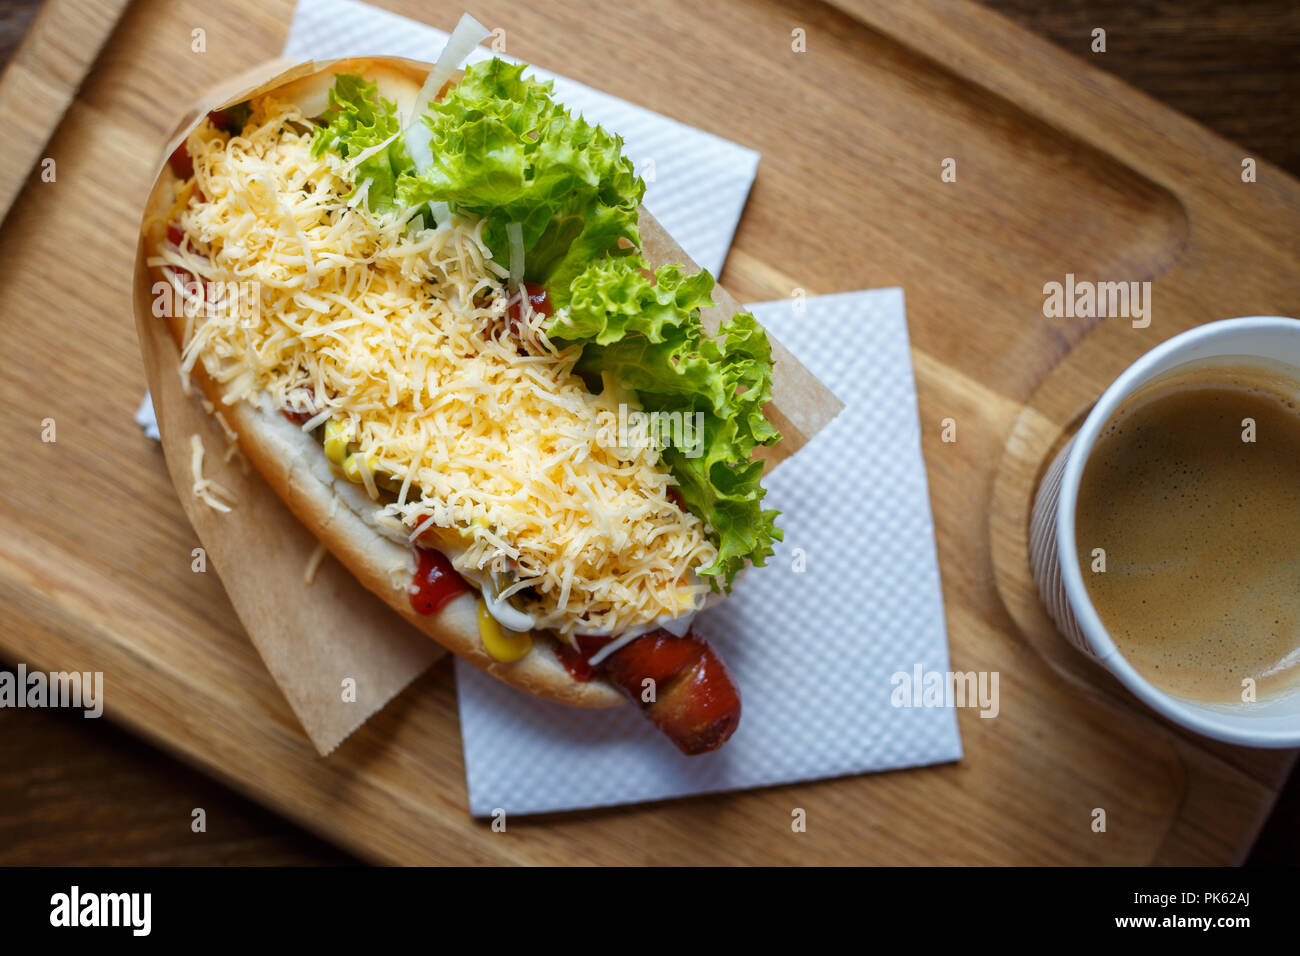 Hot dog with salad and cup of coffee on the table Stock Photo